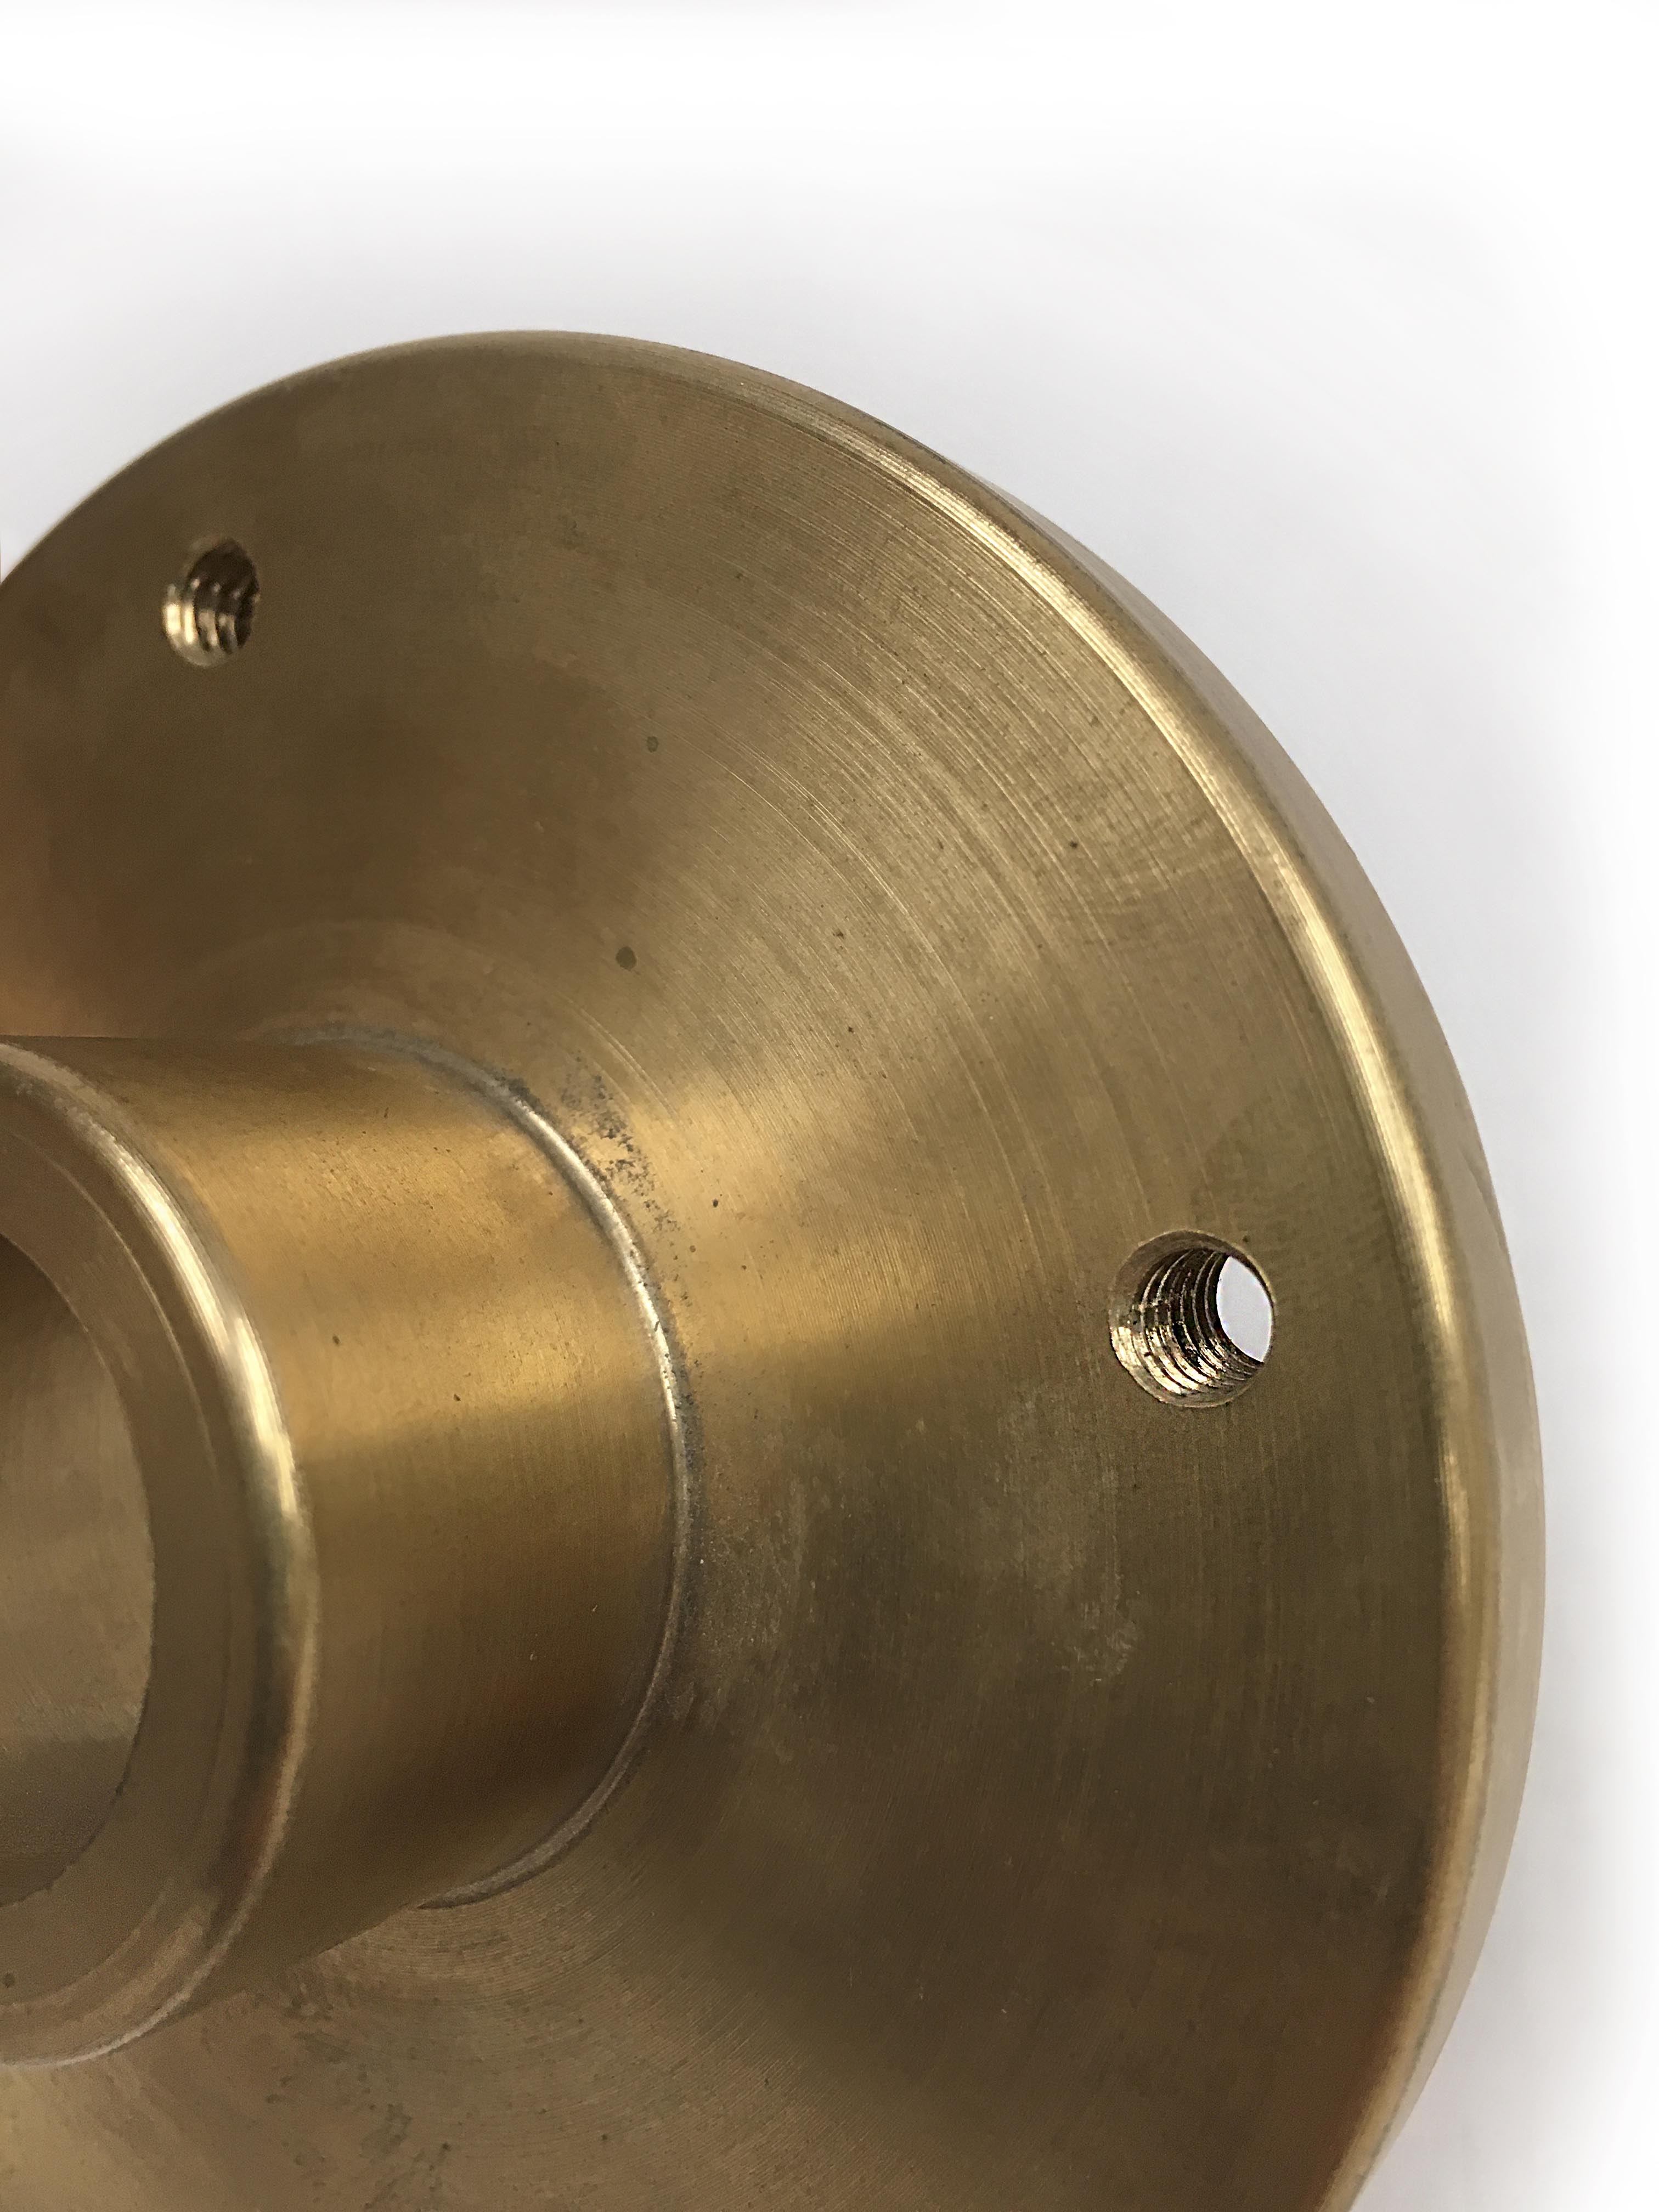 Machining Services _ Machined Part - Bronze bushing tapped holes _ Textile Industrial Welding